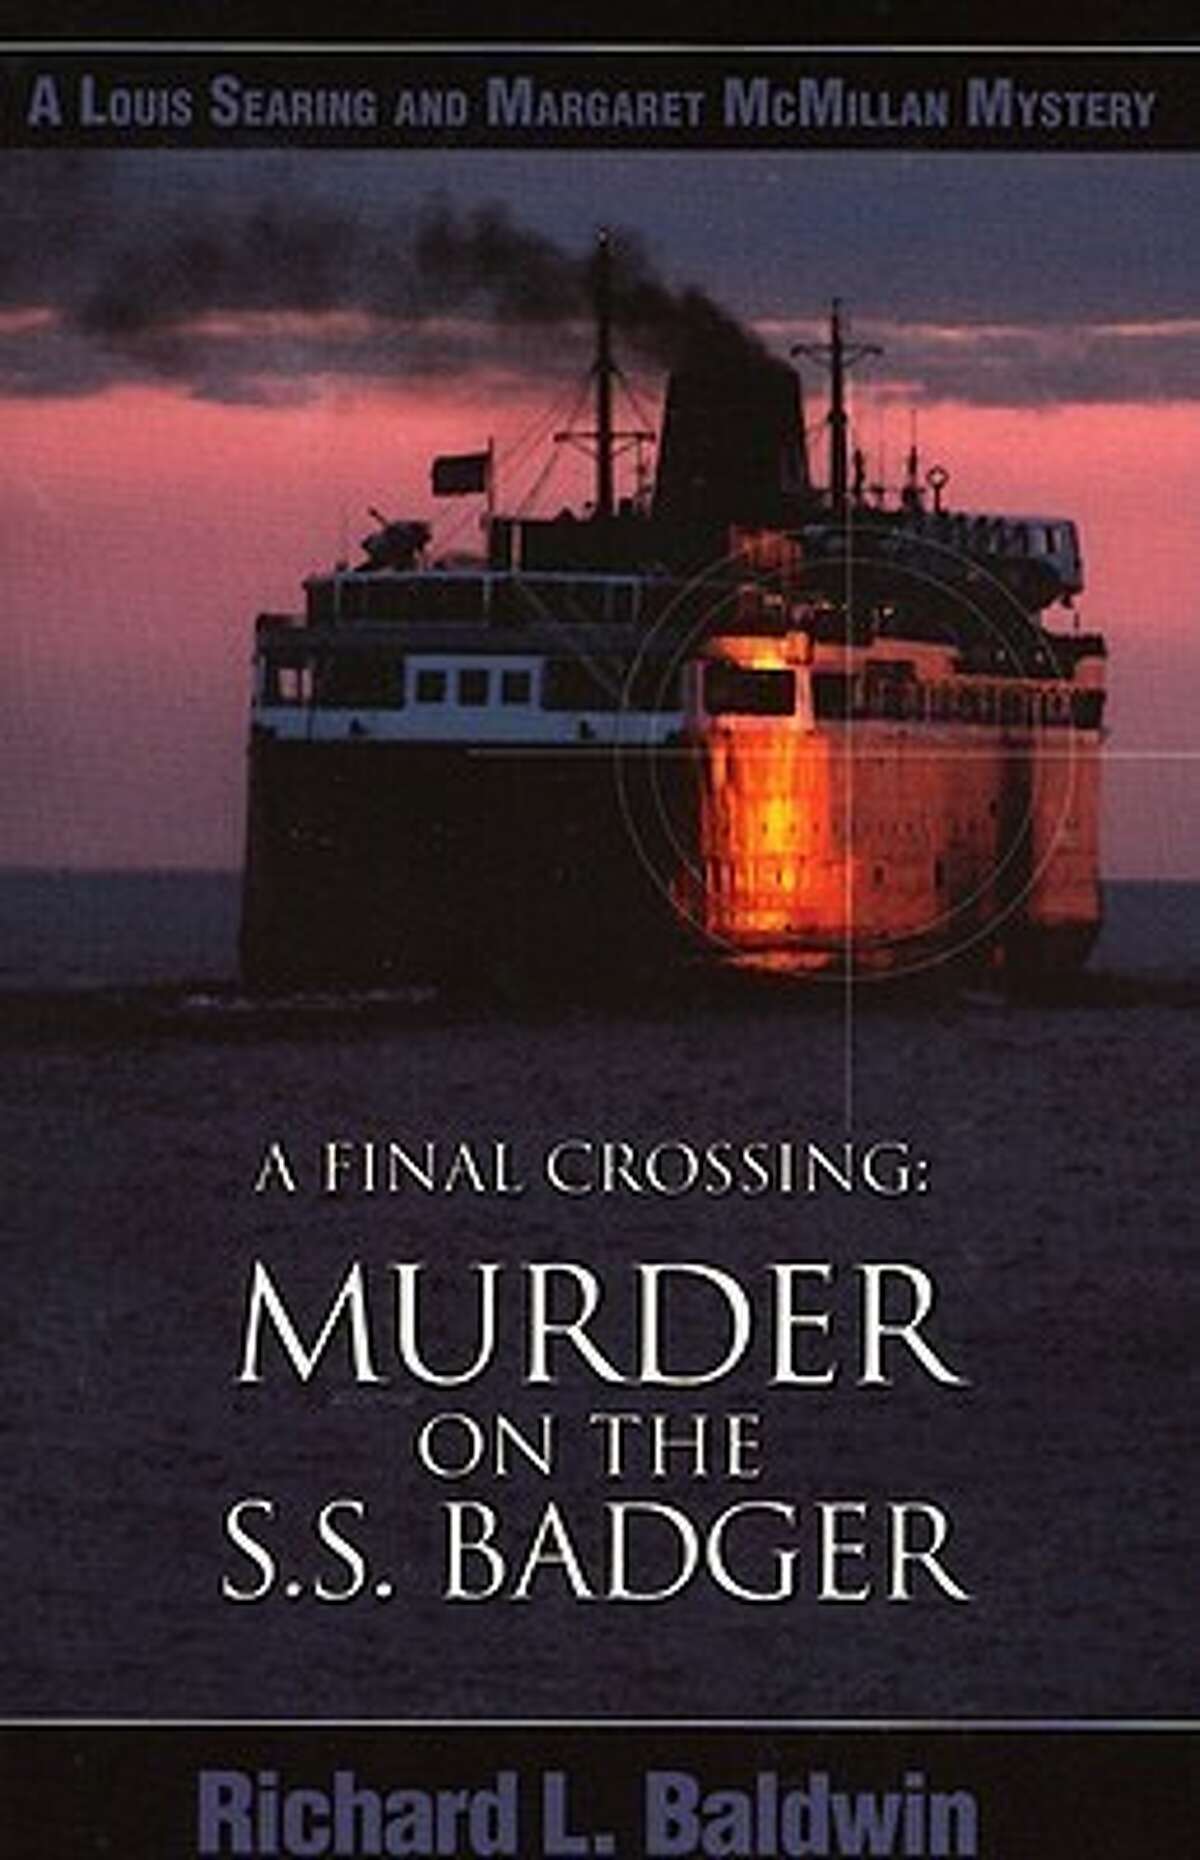 "A Final Crossing: Murder on the S.S. Badger" takes place in Manistee, Michigan and nearby communities on and across the lake.